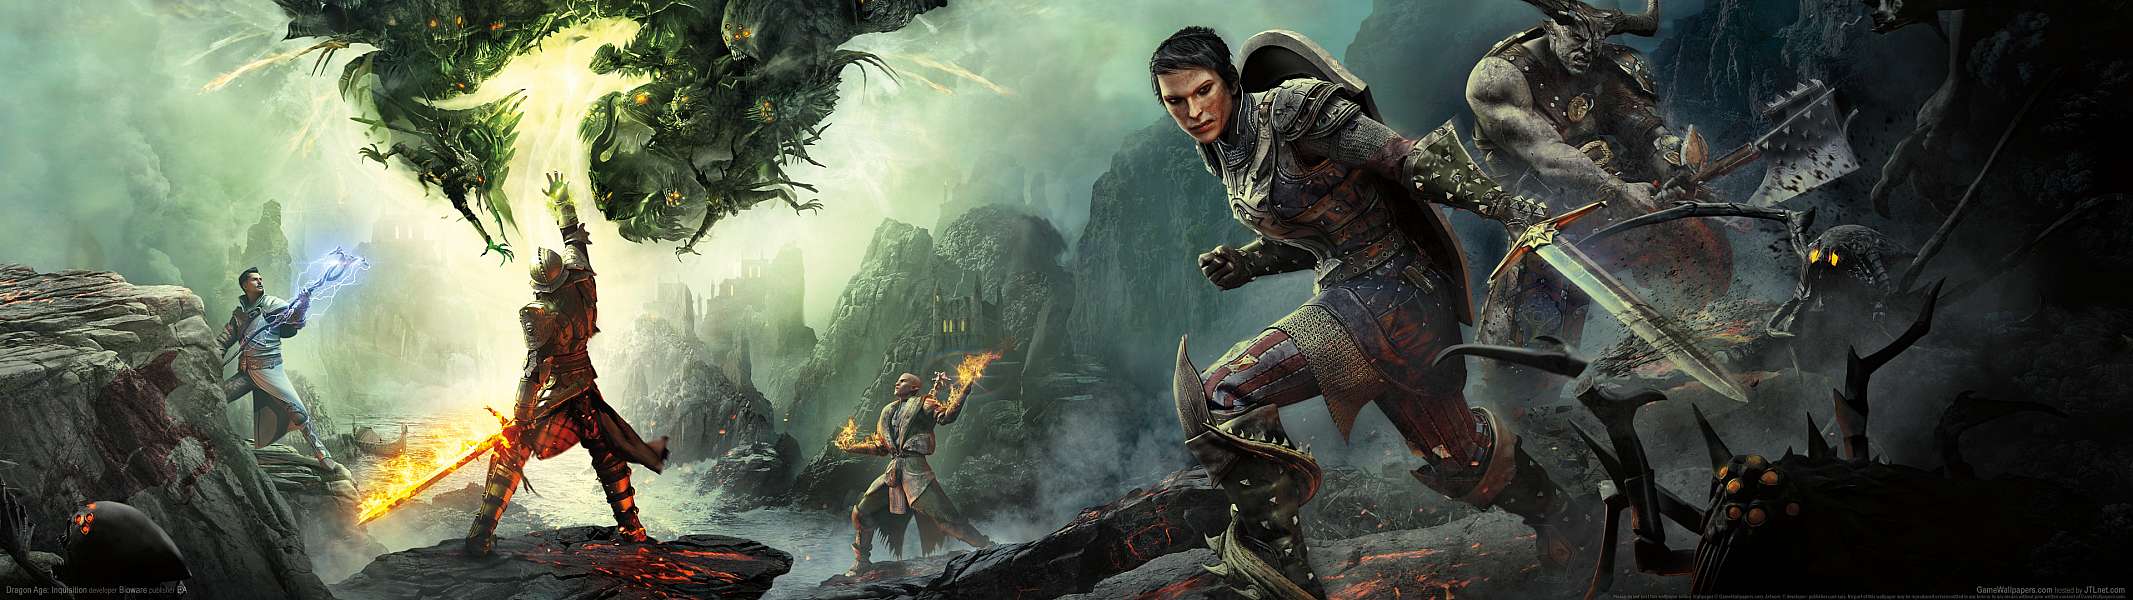 Dragon Age: Inquisition dual screen wallpaper or background